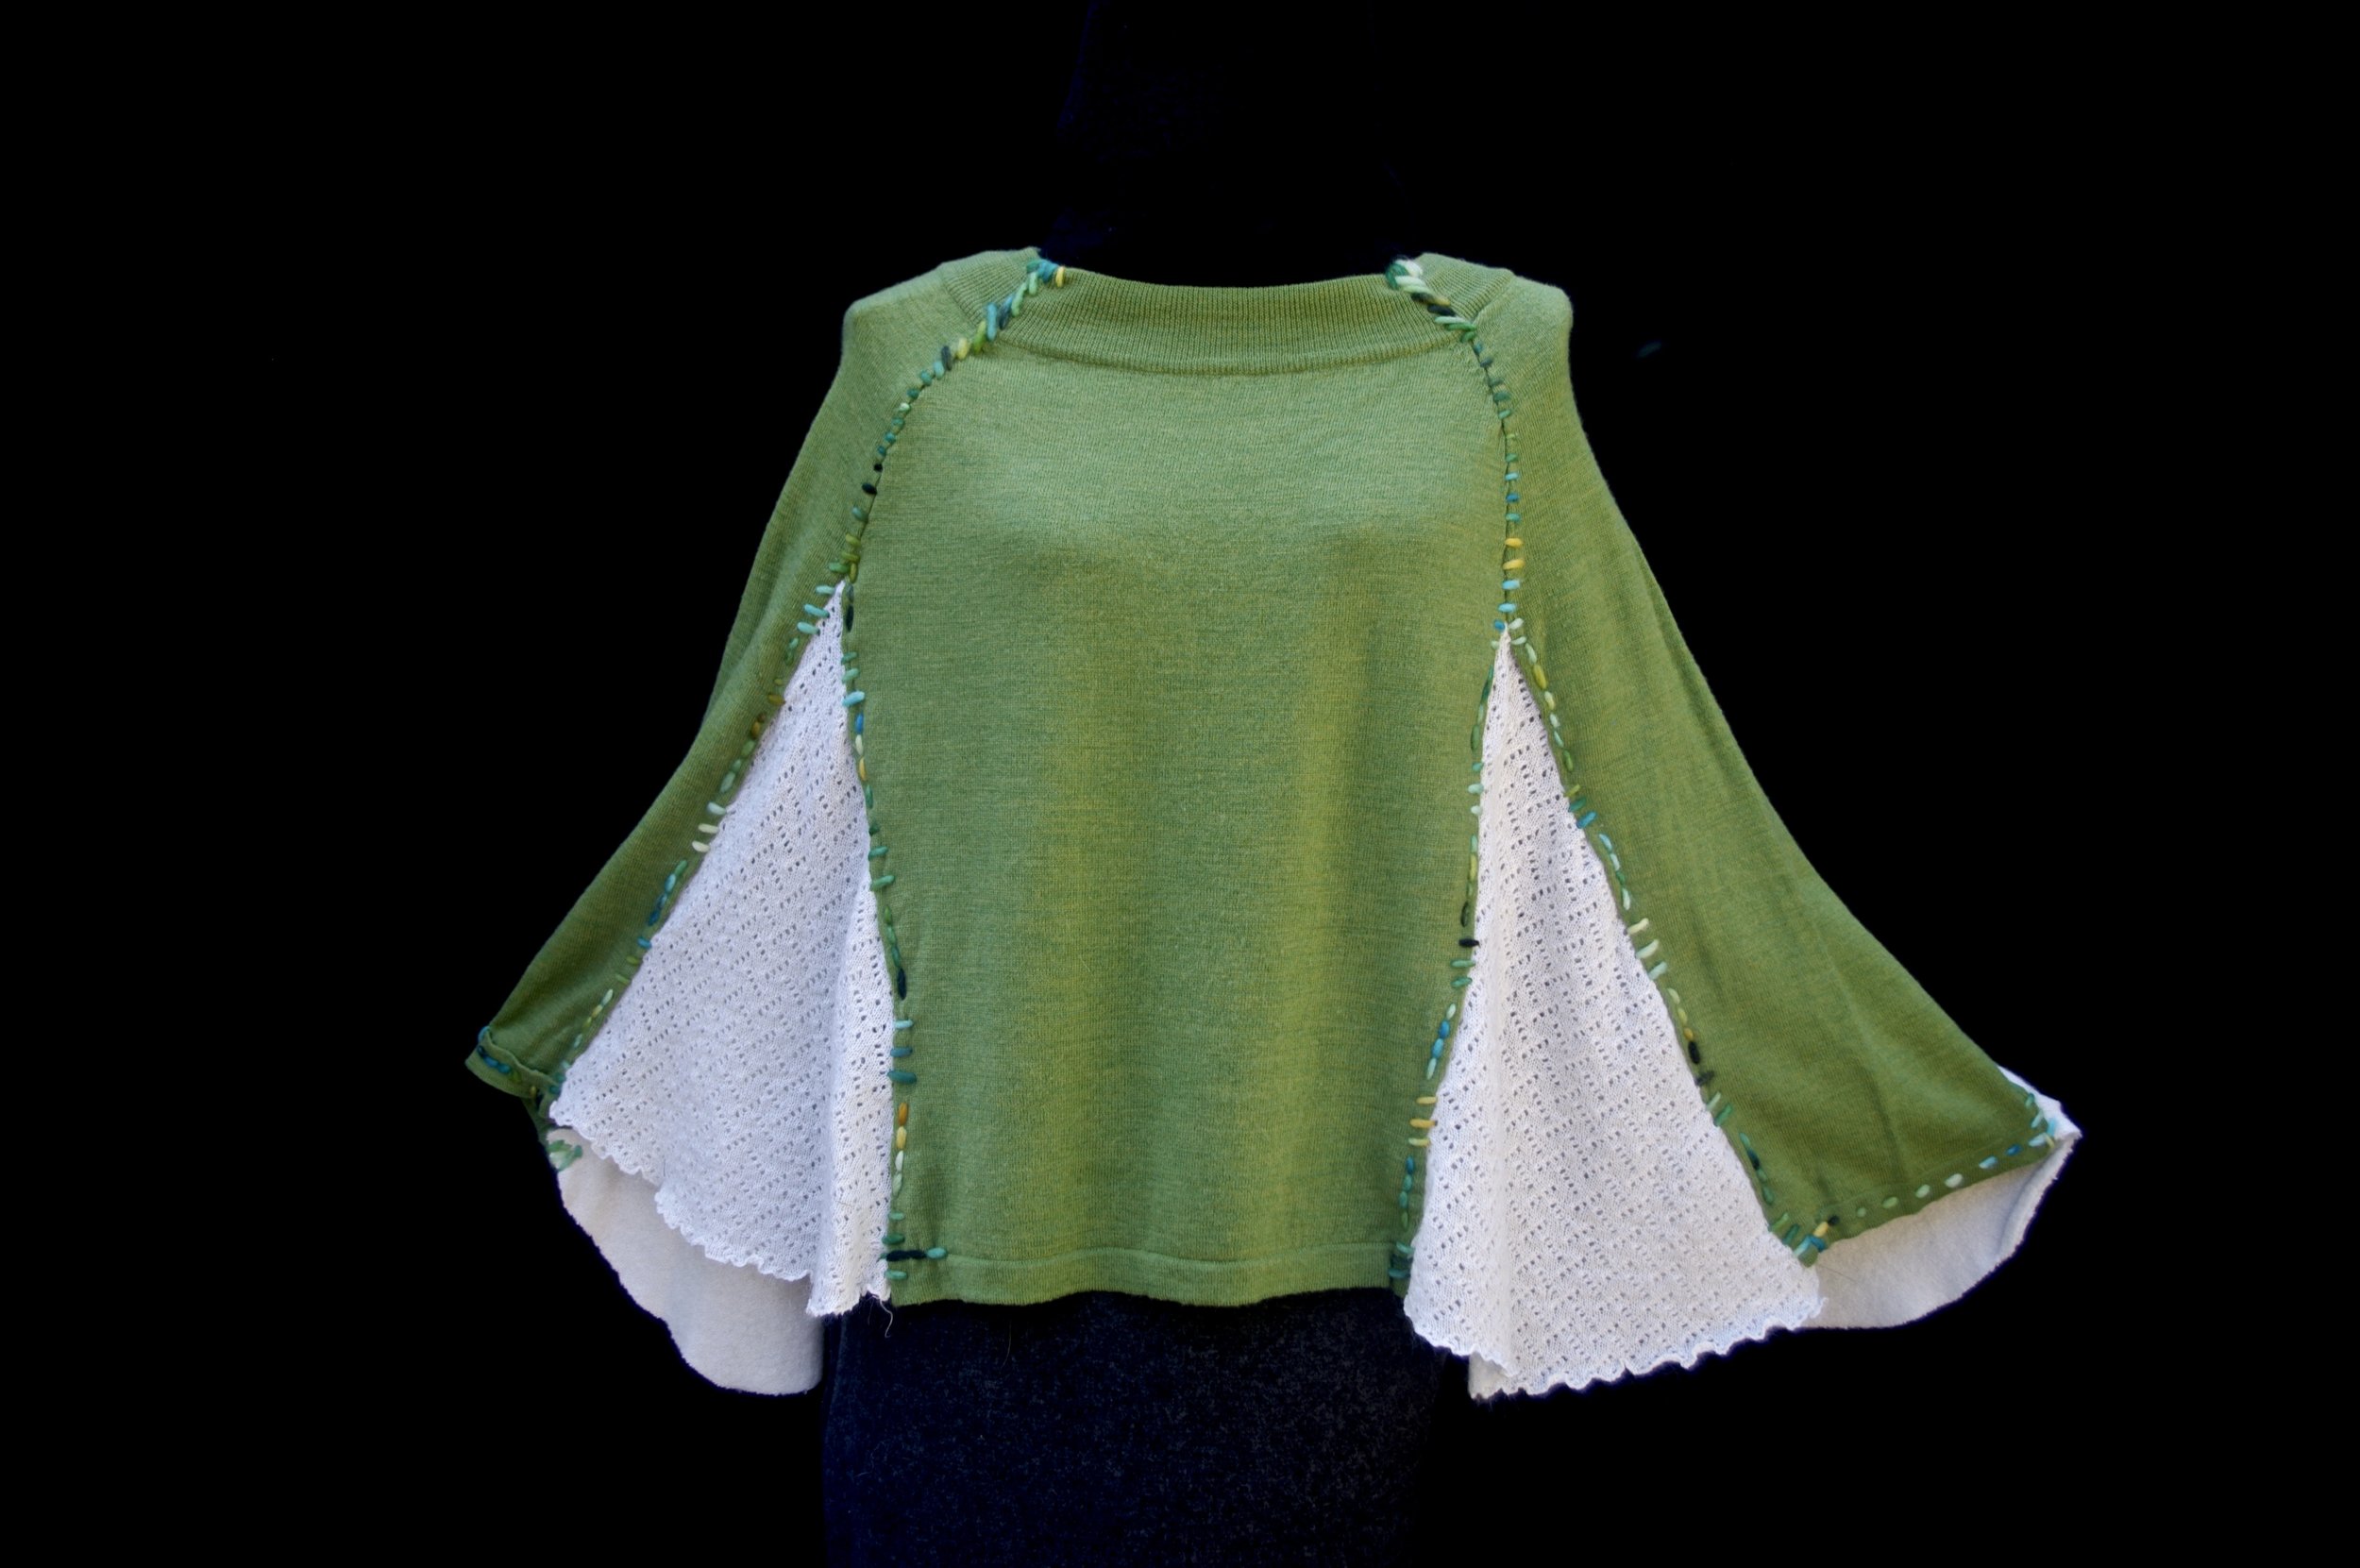 Handstitched poncho of upcycled cashmere.